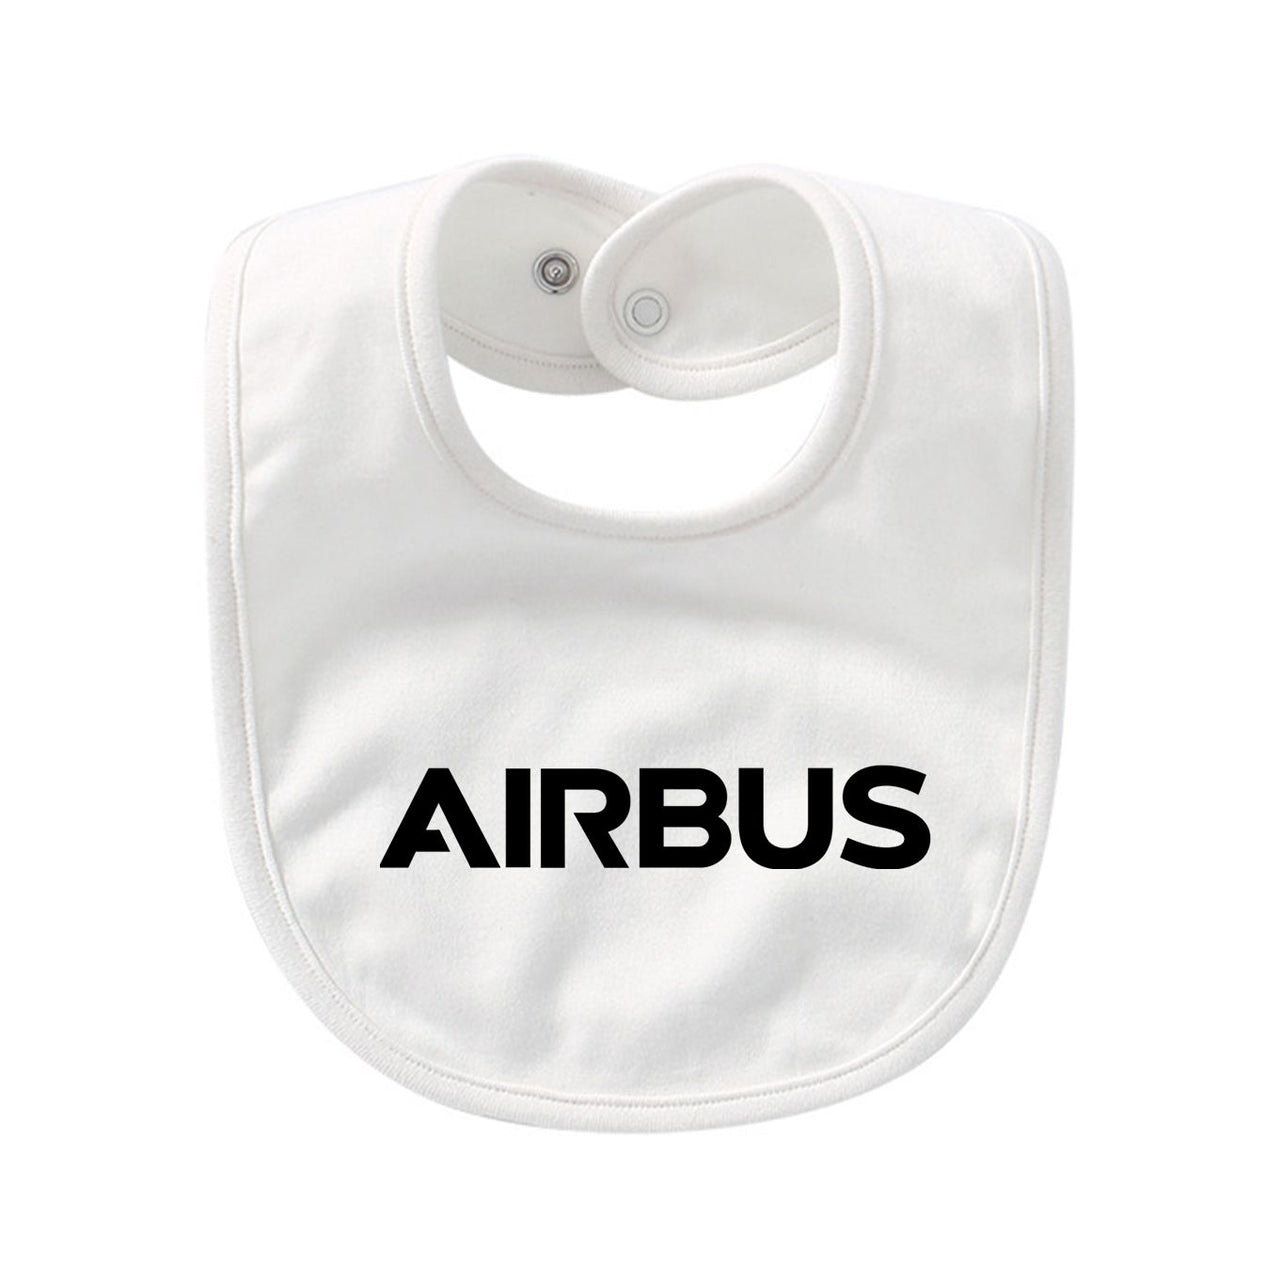 Airbus & Text Designed Baby Saliva & Feeding Towels